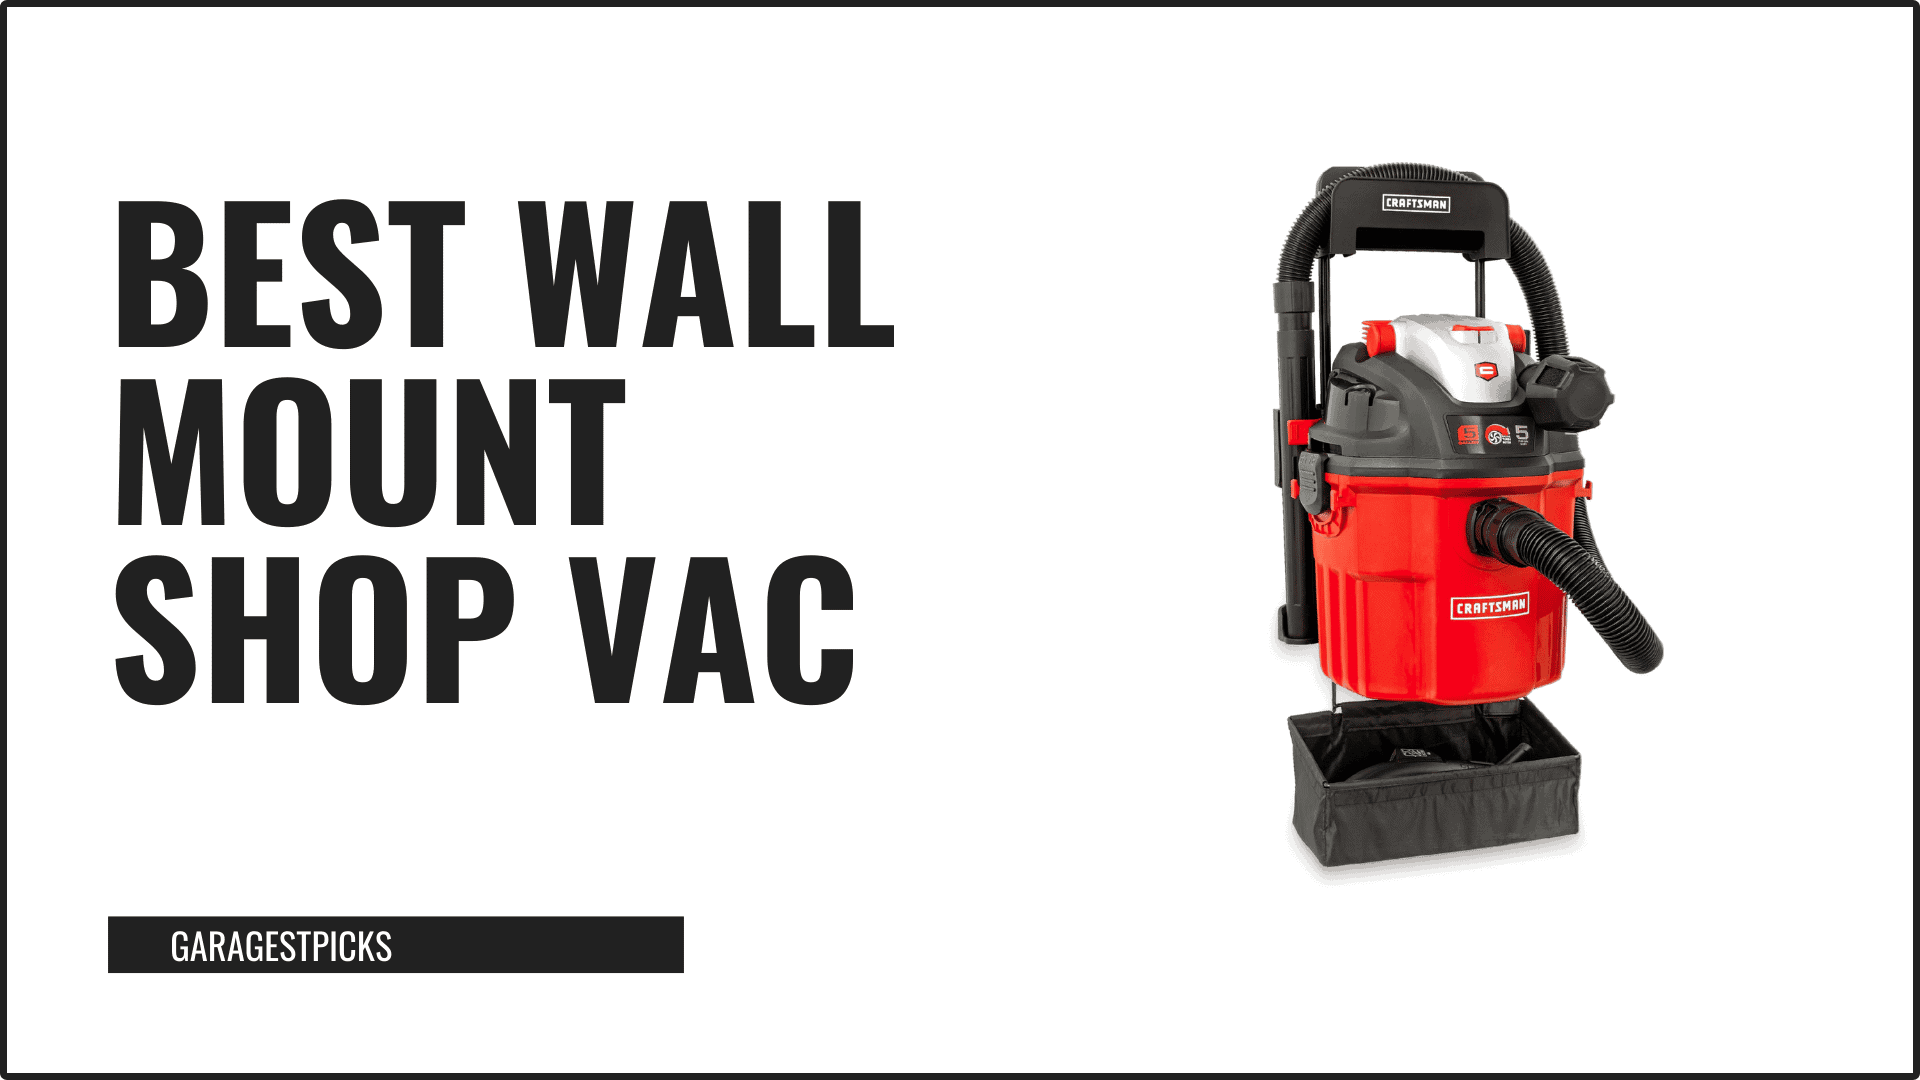 best wall mount shop vac in black text on white background with image of wall mounted shop vac